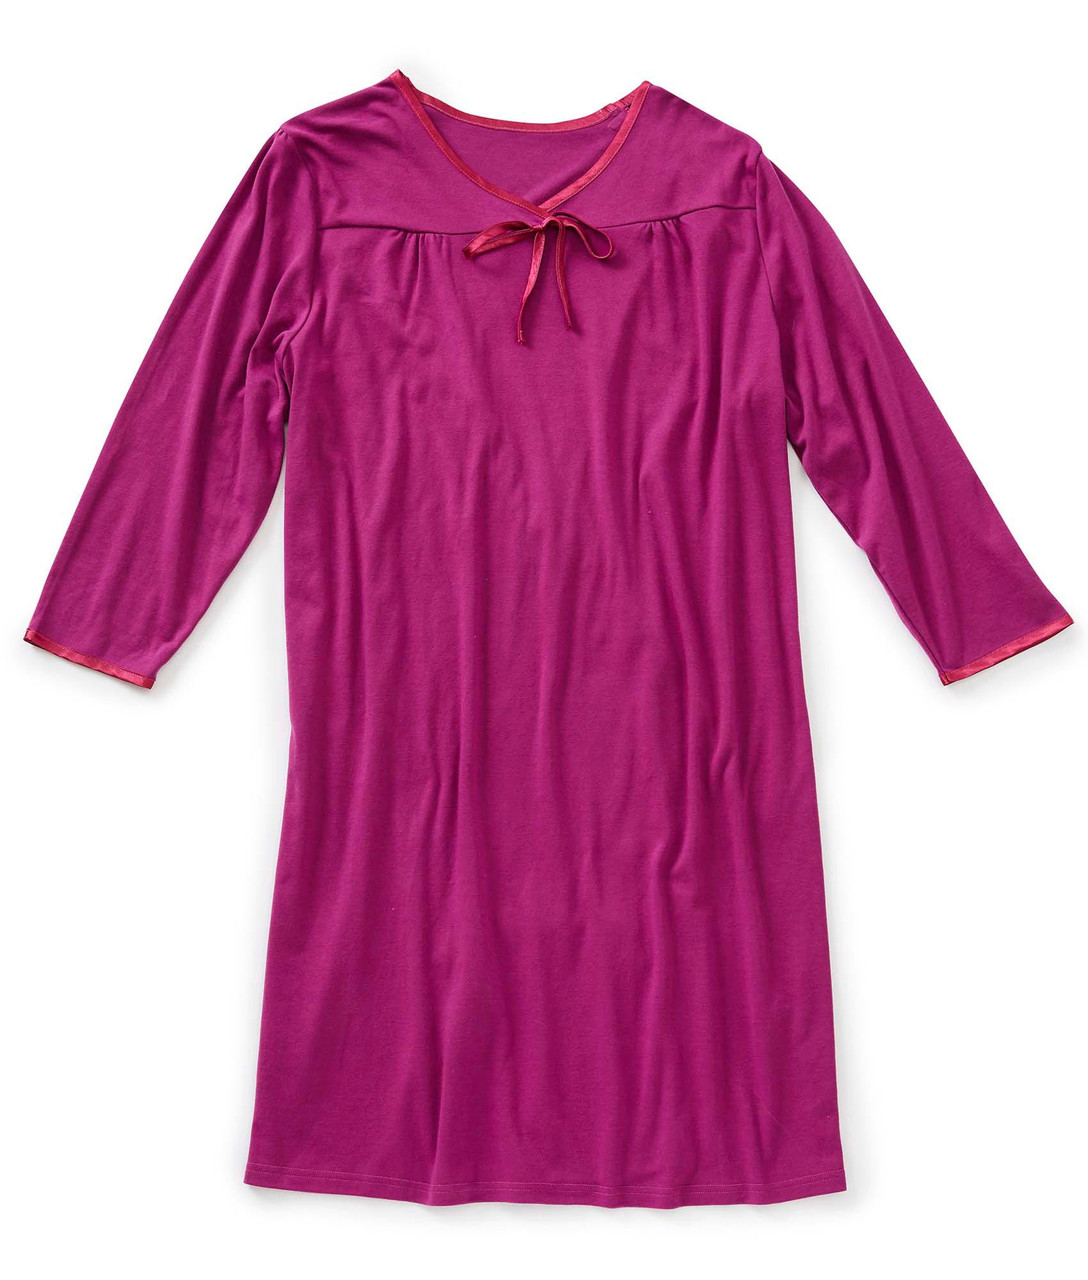 Silverts SV26120 Women's Antimicrobial Open Back Nightgown Wine, Size=XS, SV26120-SV10-XS